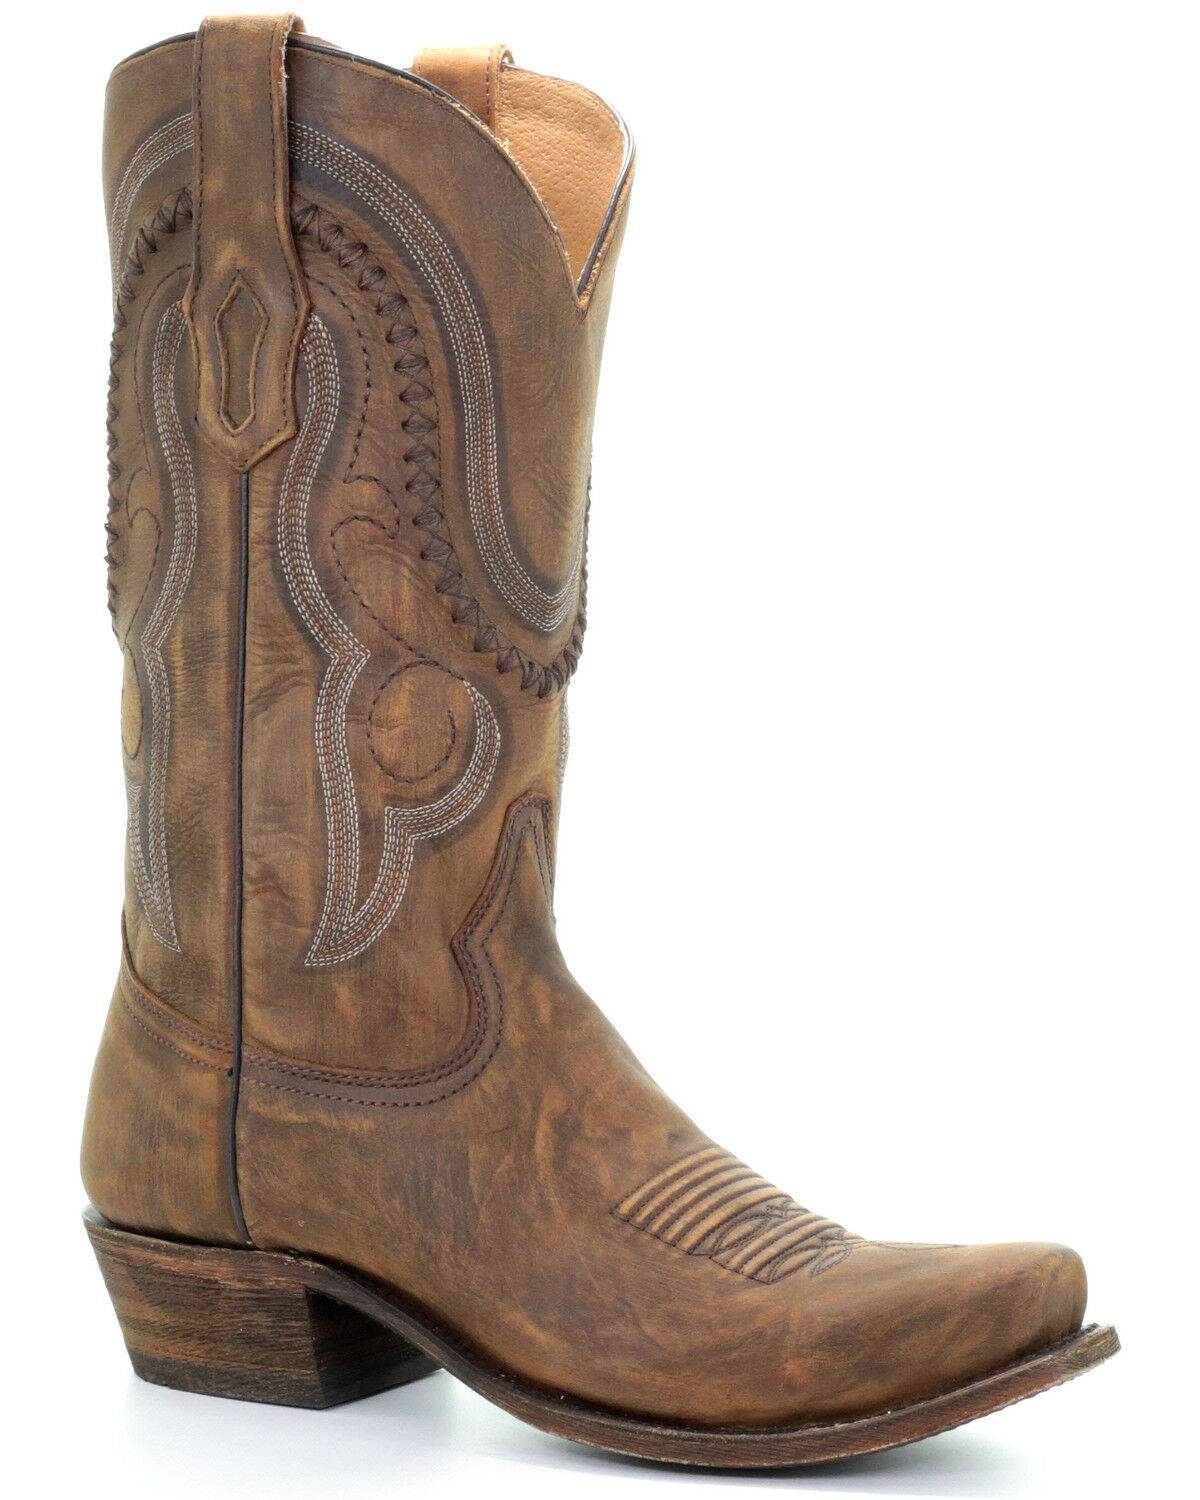 Corral Men's Leather Narrow Square Toe Western Boots Gold Cowhide A3479 